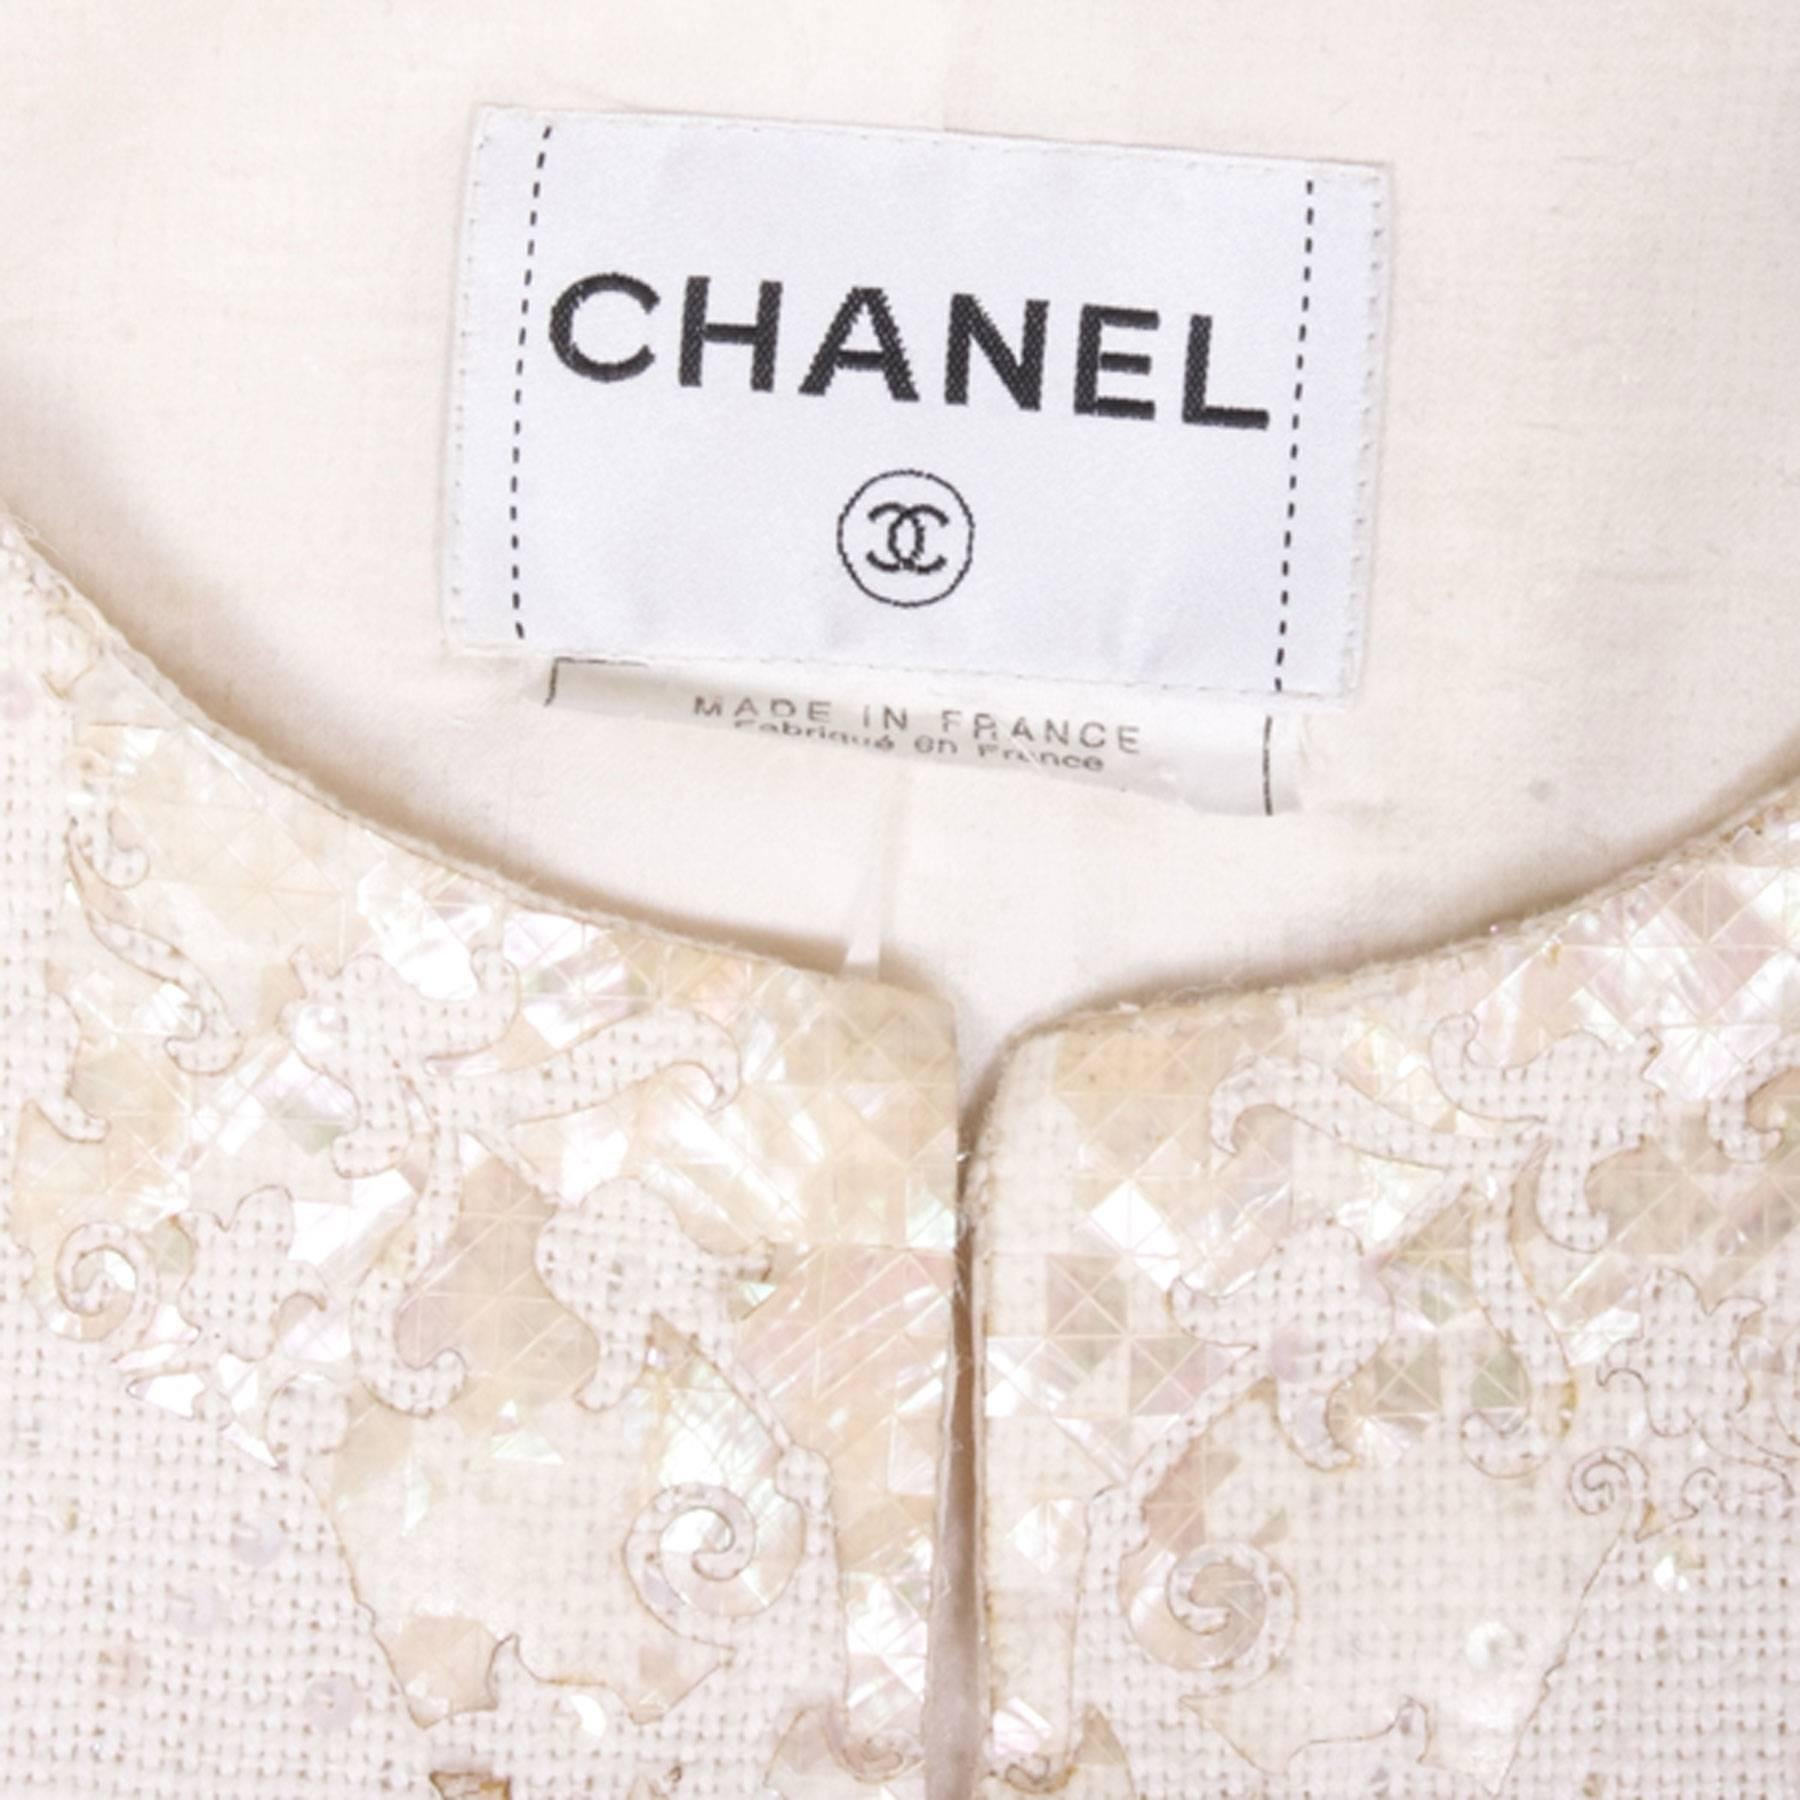 CHANEL Vest 'The Seabed' in Ivory Color Size 38FR 4